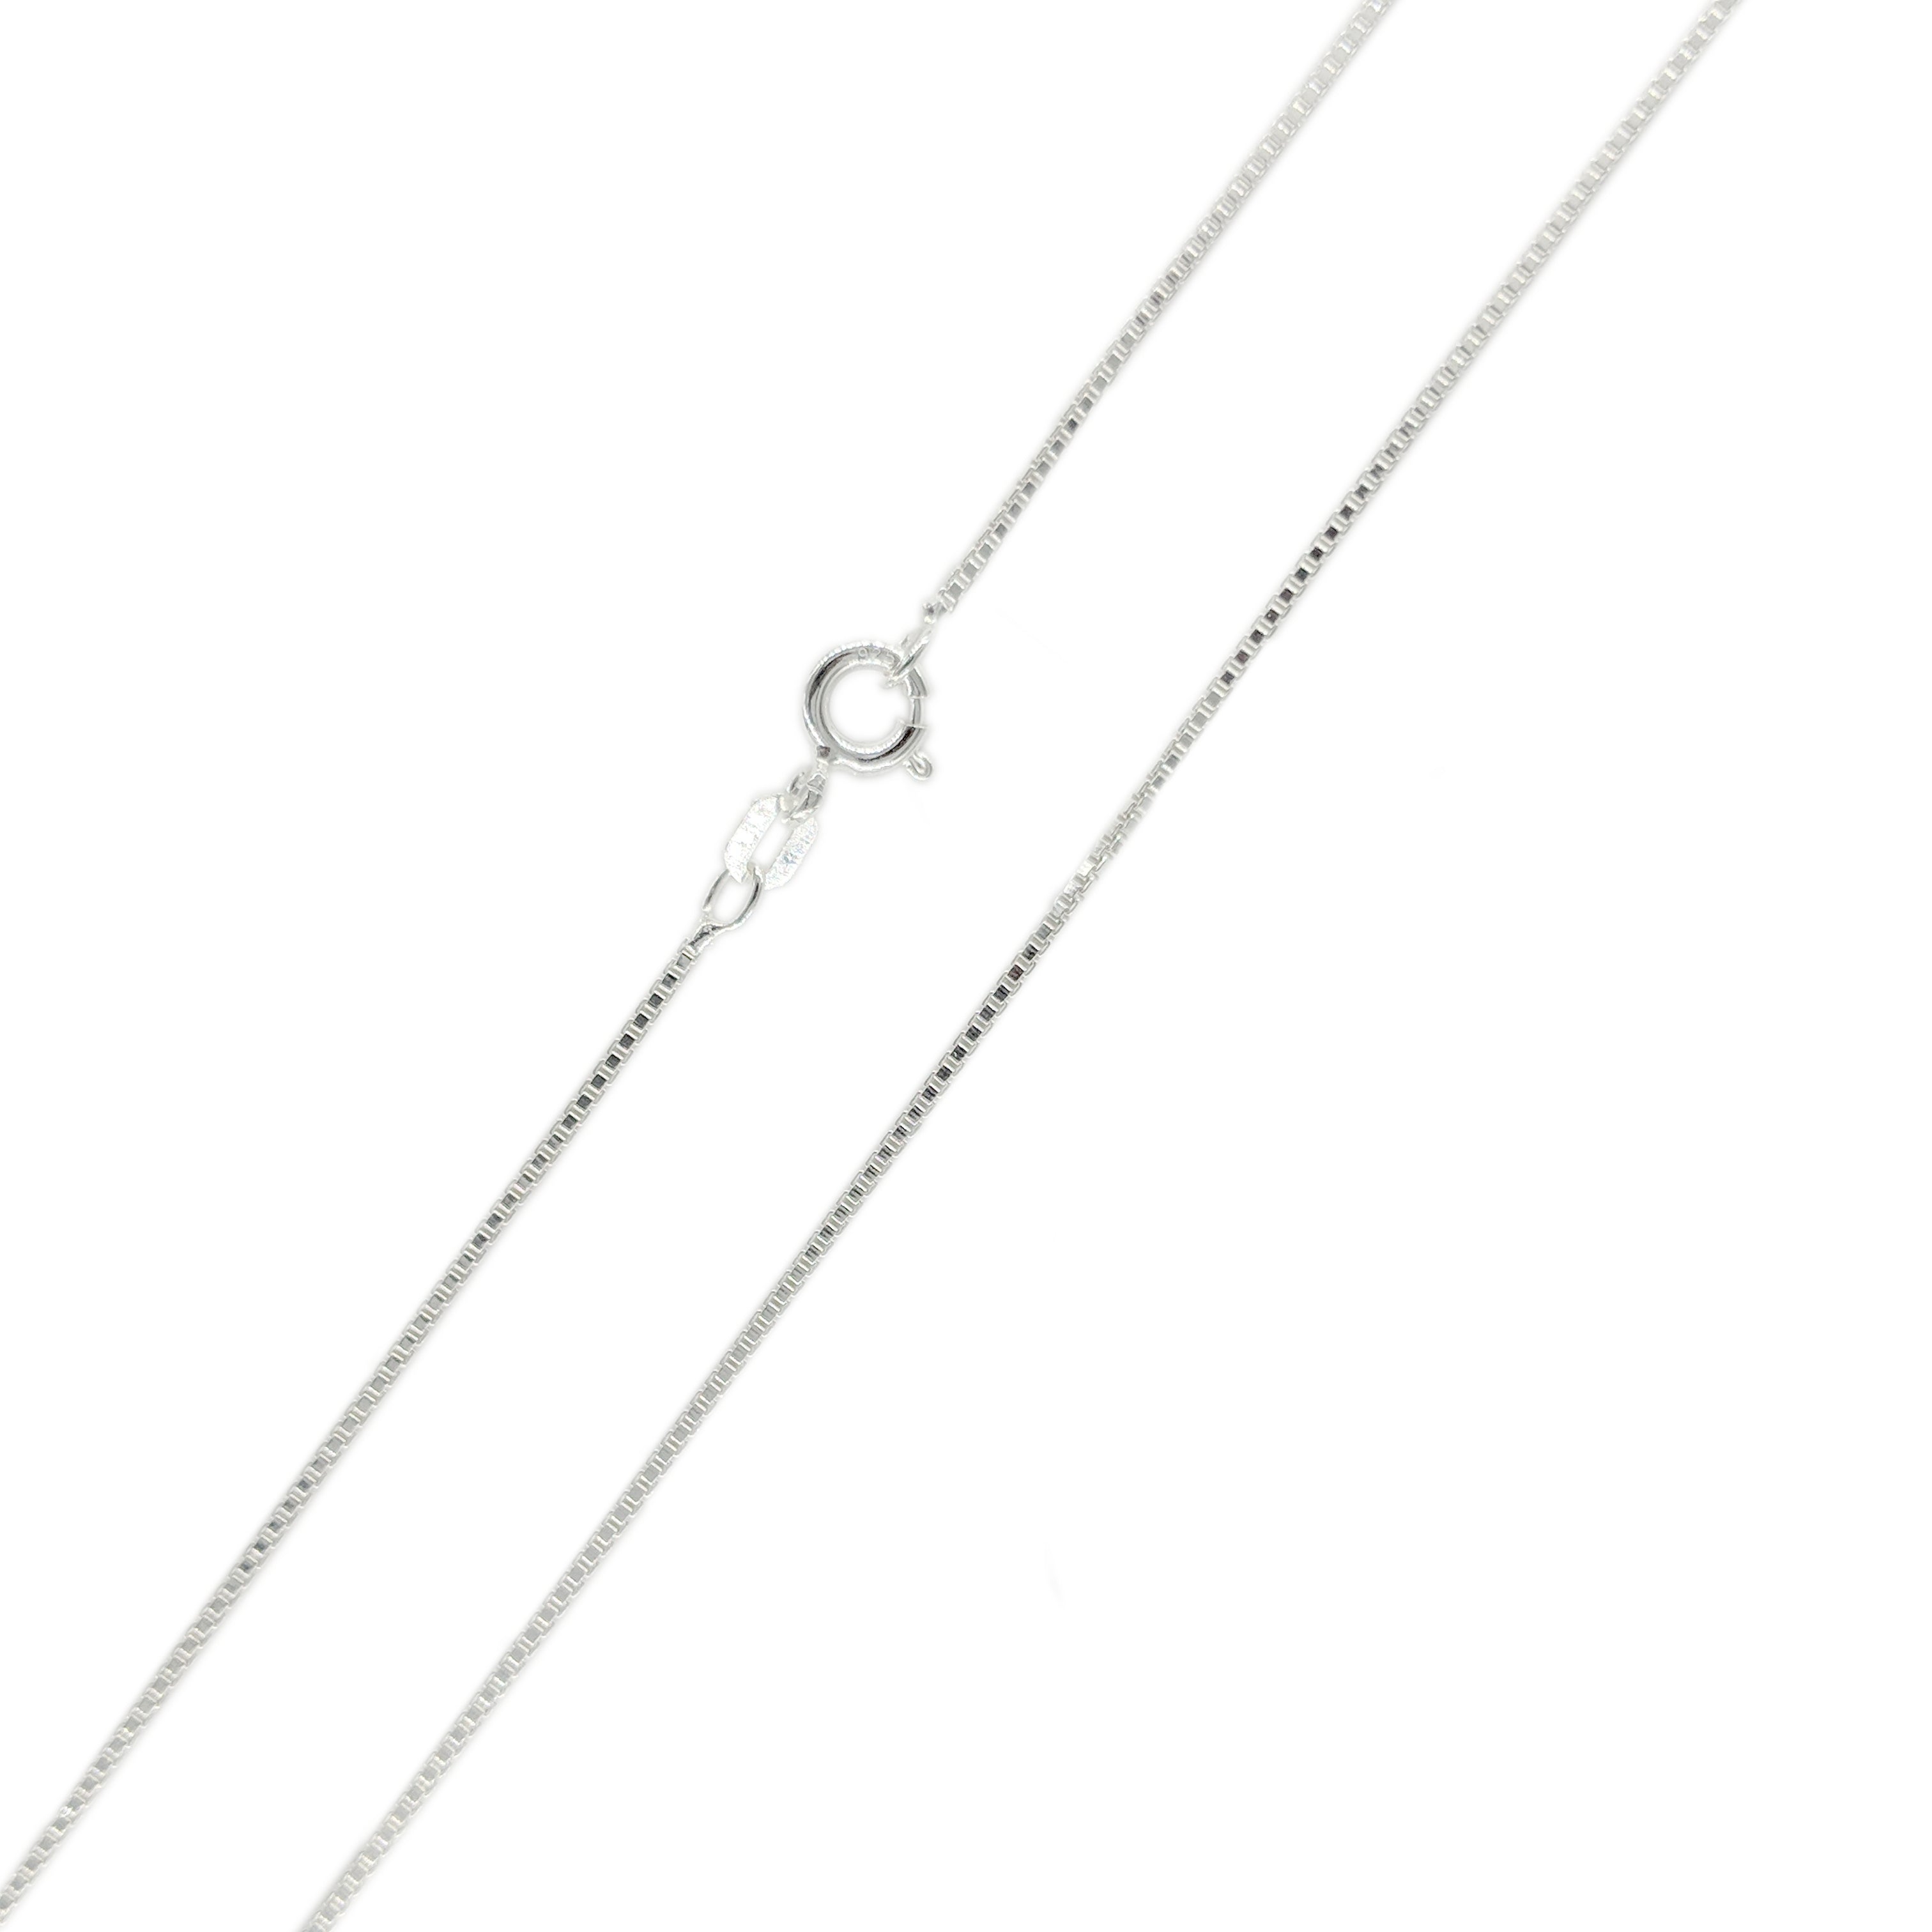 Buy Silver Box Chain Necklace for Men Lobster Clasp Silver Men's Chain  Necklace Sterling Silver 2.5mm Box Chain Silver Round Box Chain Online in  India - Etsy